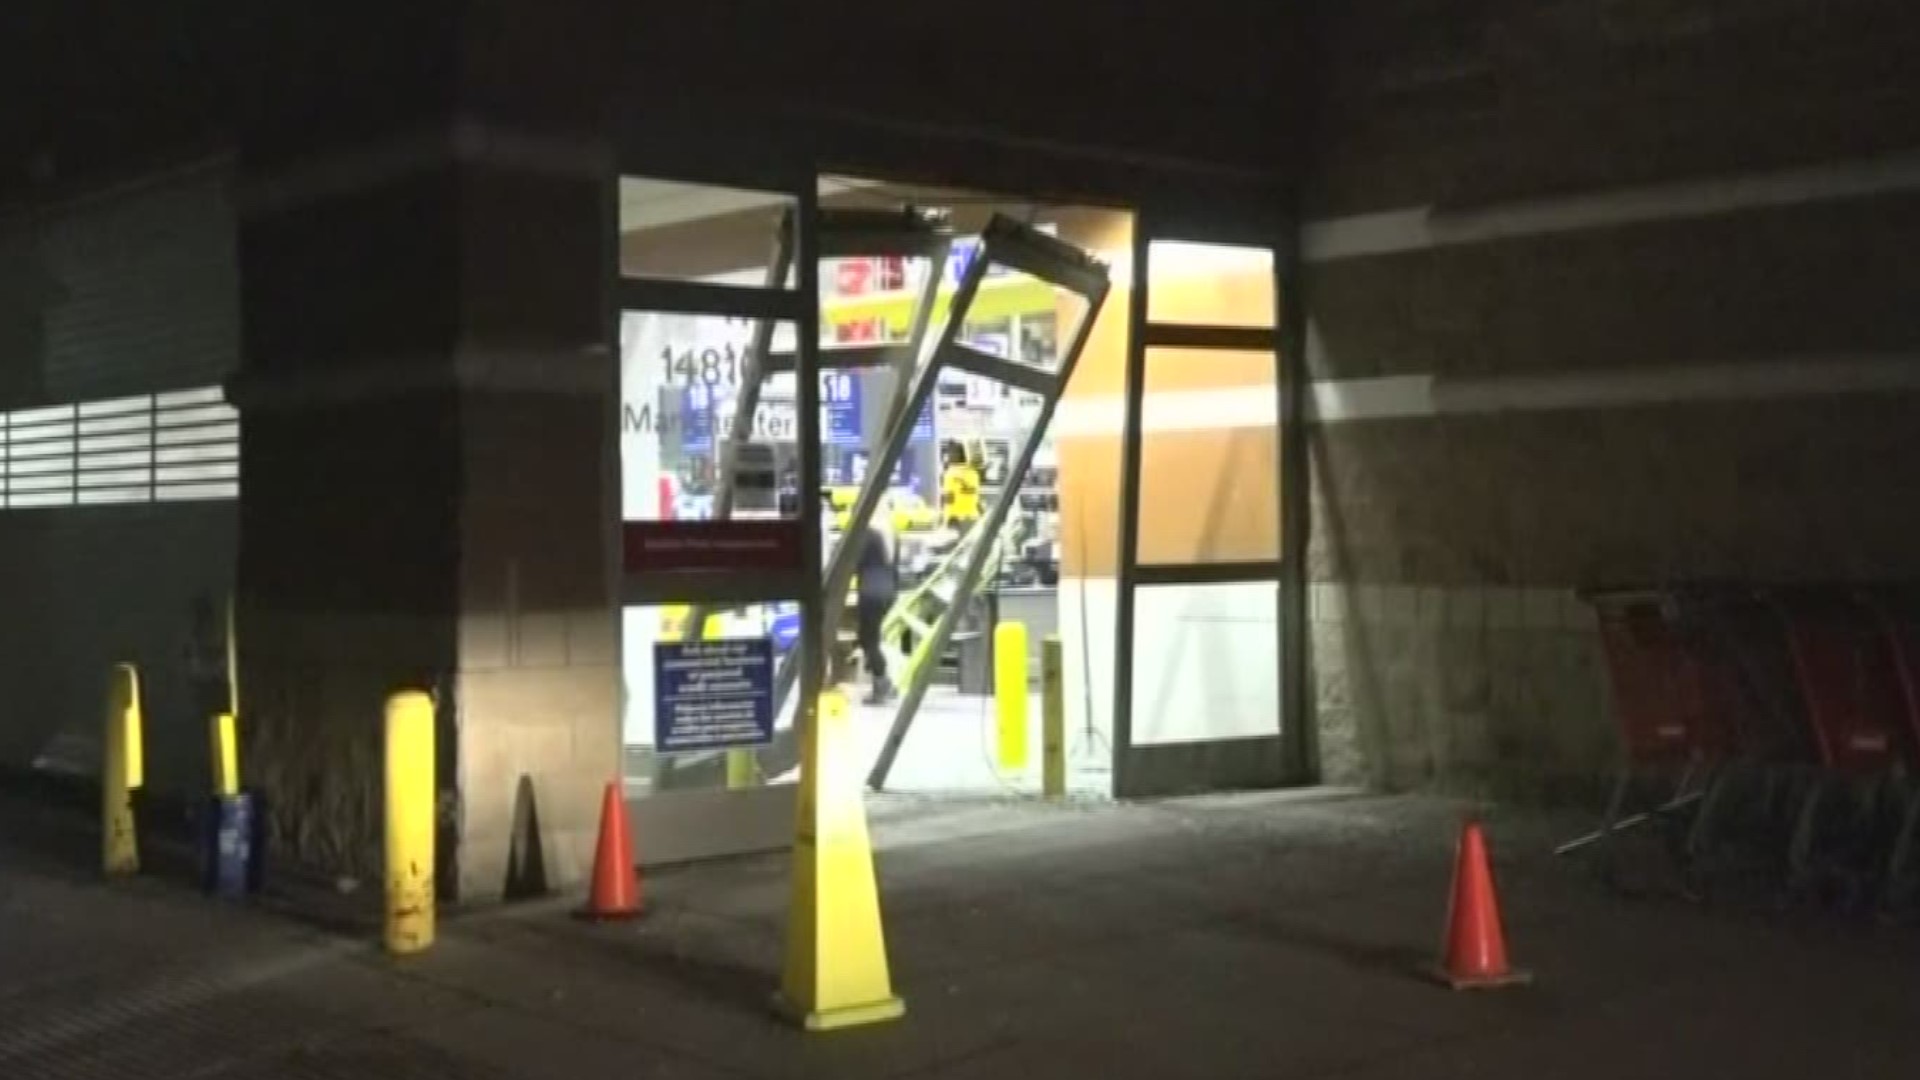 Police said surveillance footage showed the thieves backing the SUV through the store's glass sliding doors